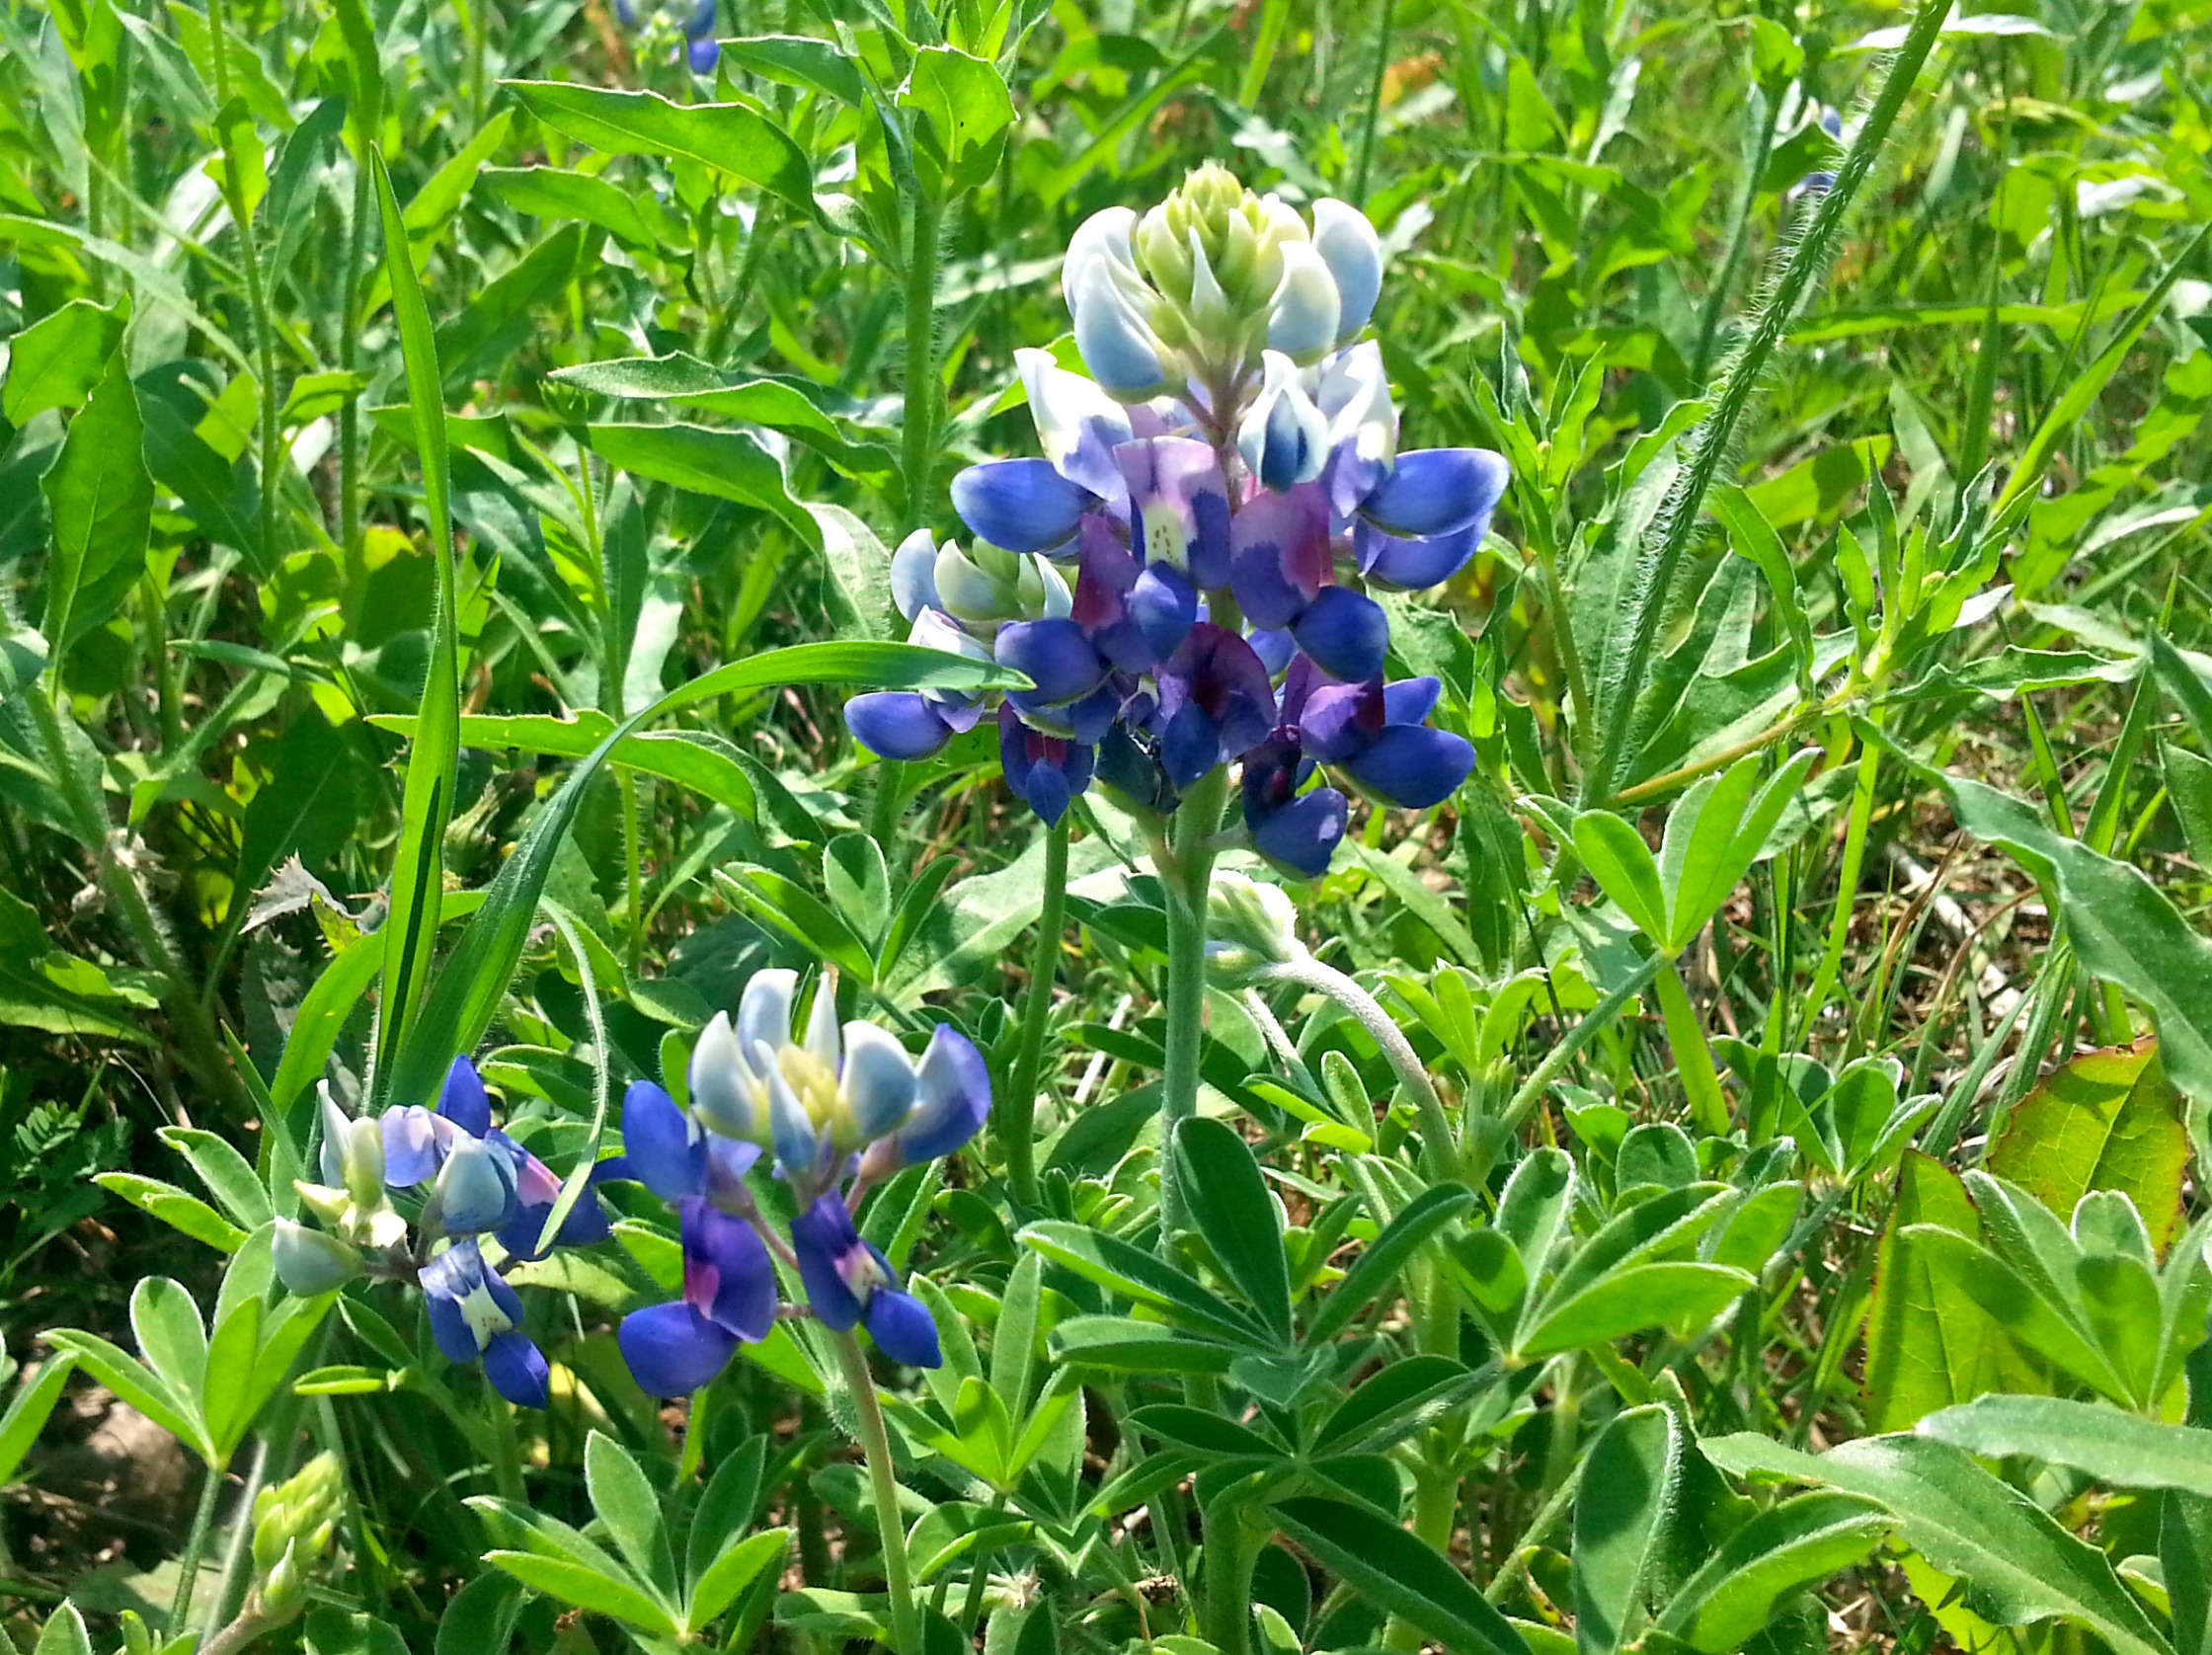 The bluebonnets have arrived!